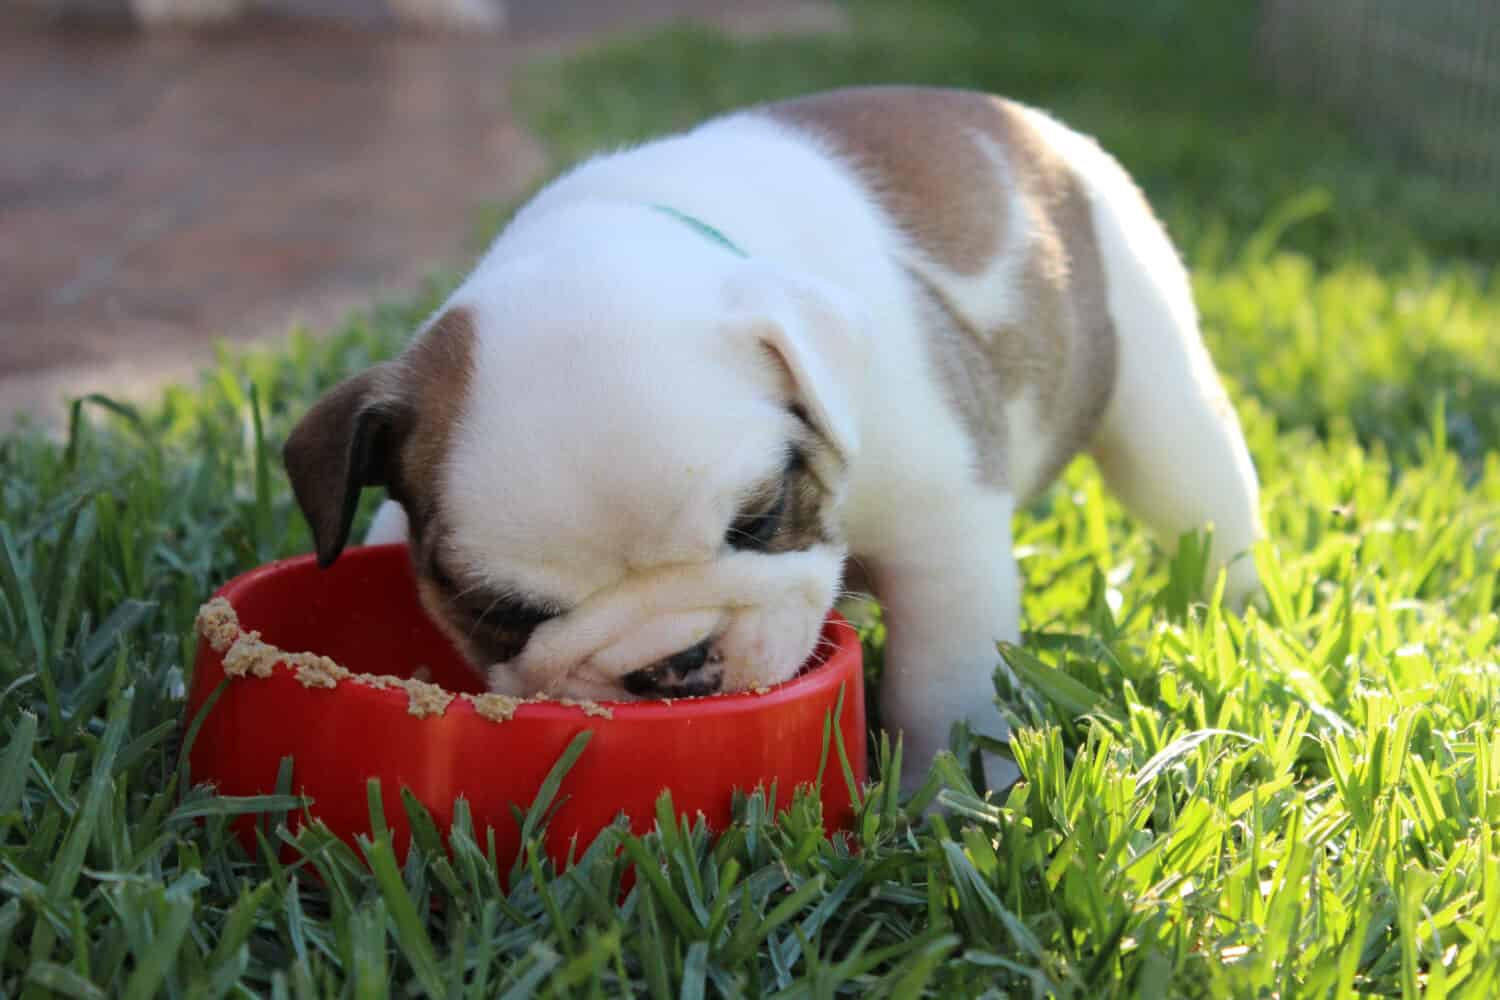 English Bulldog eating outside in a red bowl